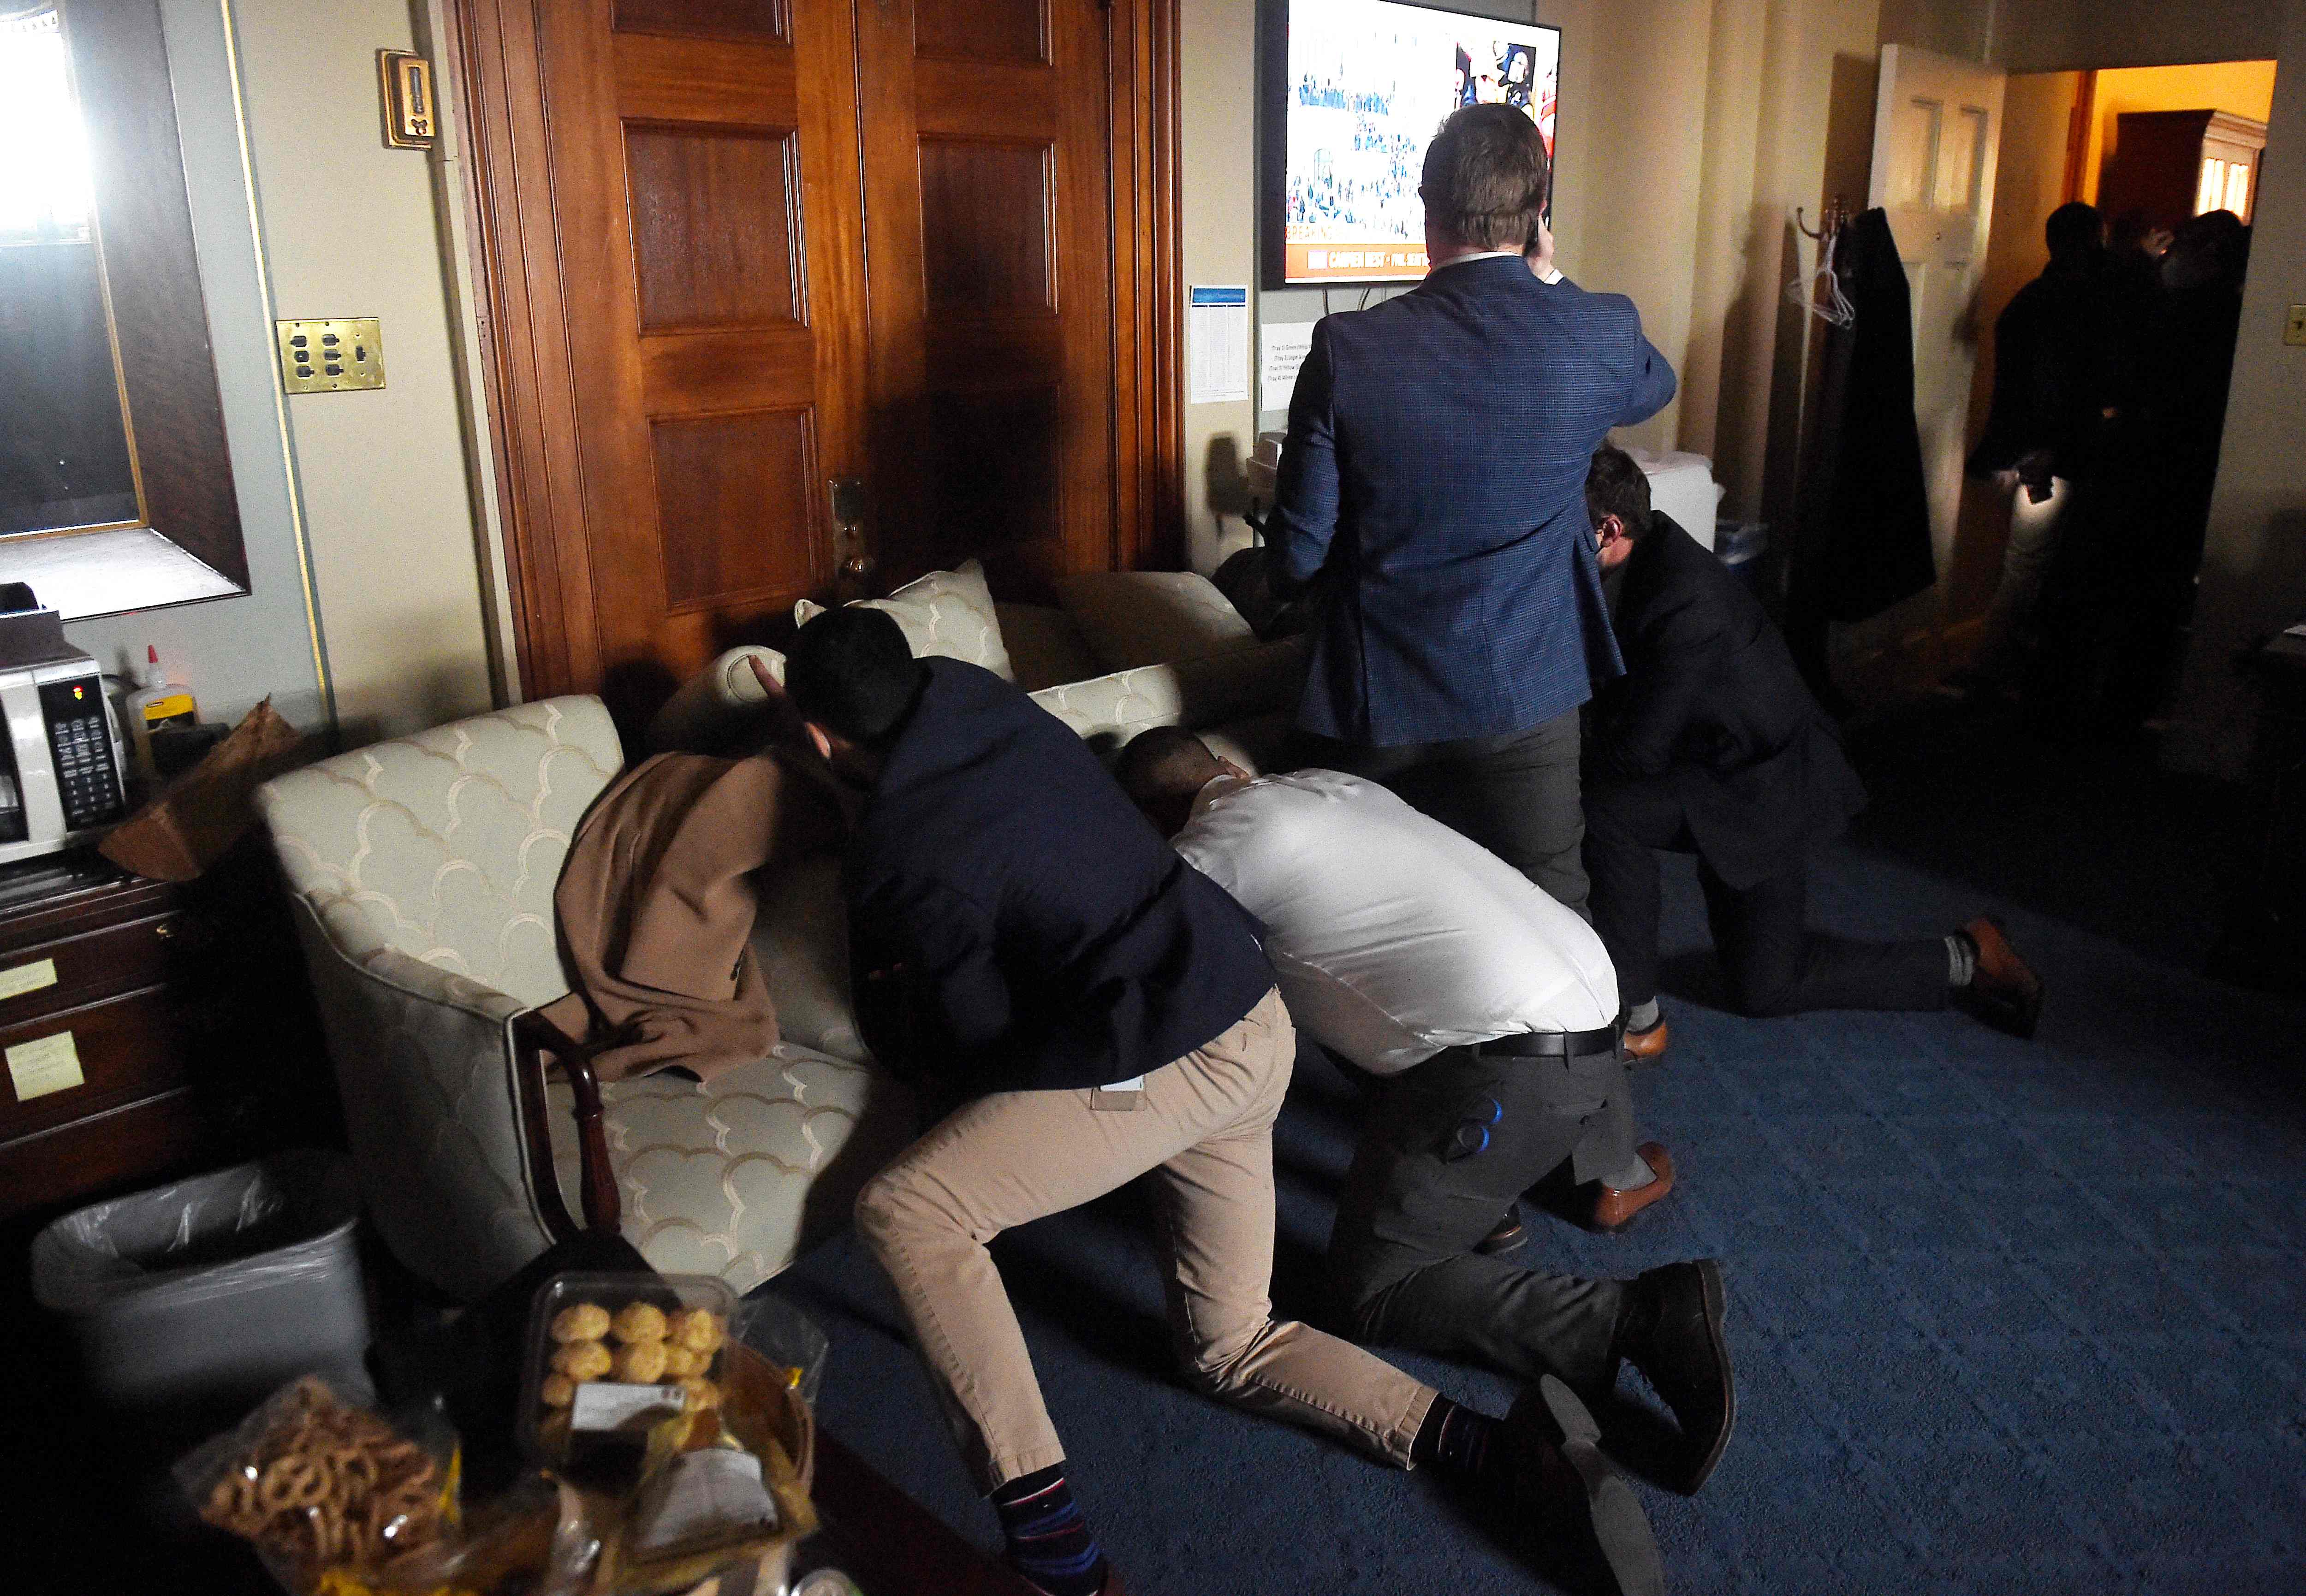 Congress staffers barricade themselves after Trump supporters stormed inside the U.S. Capitol in Washington, D.C., on Jan. 6, 2021.